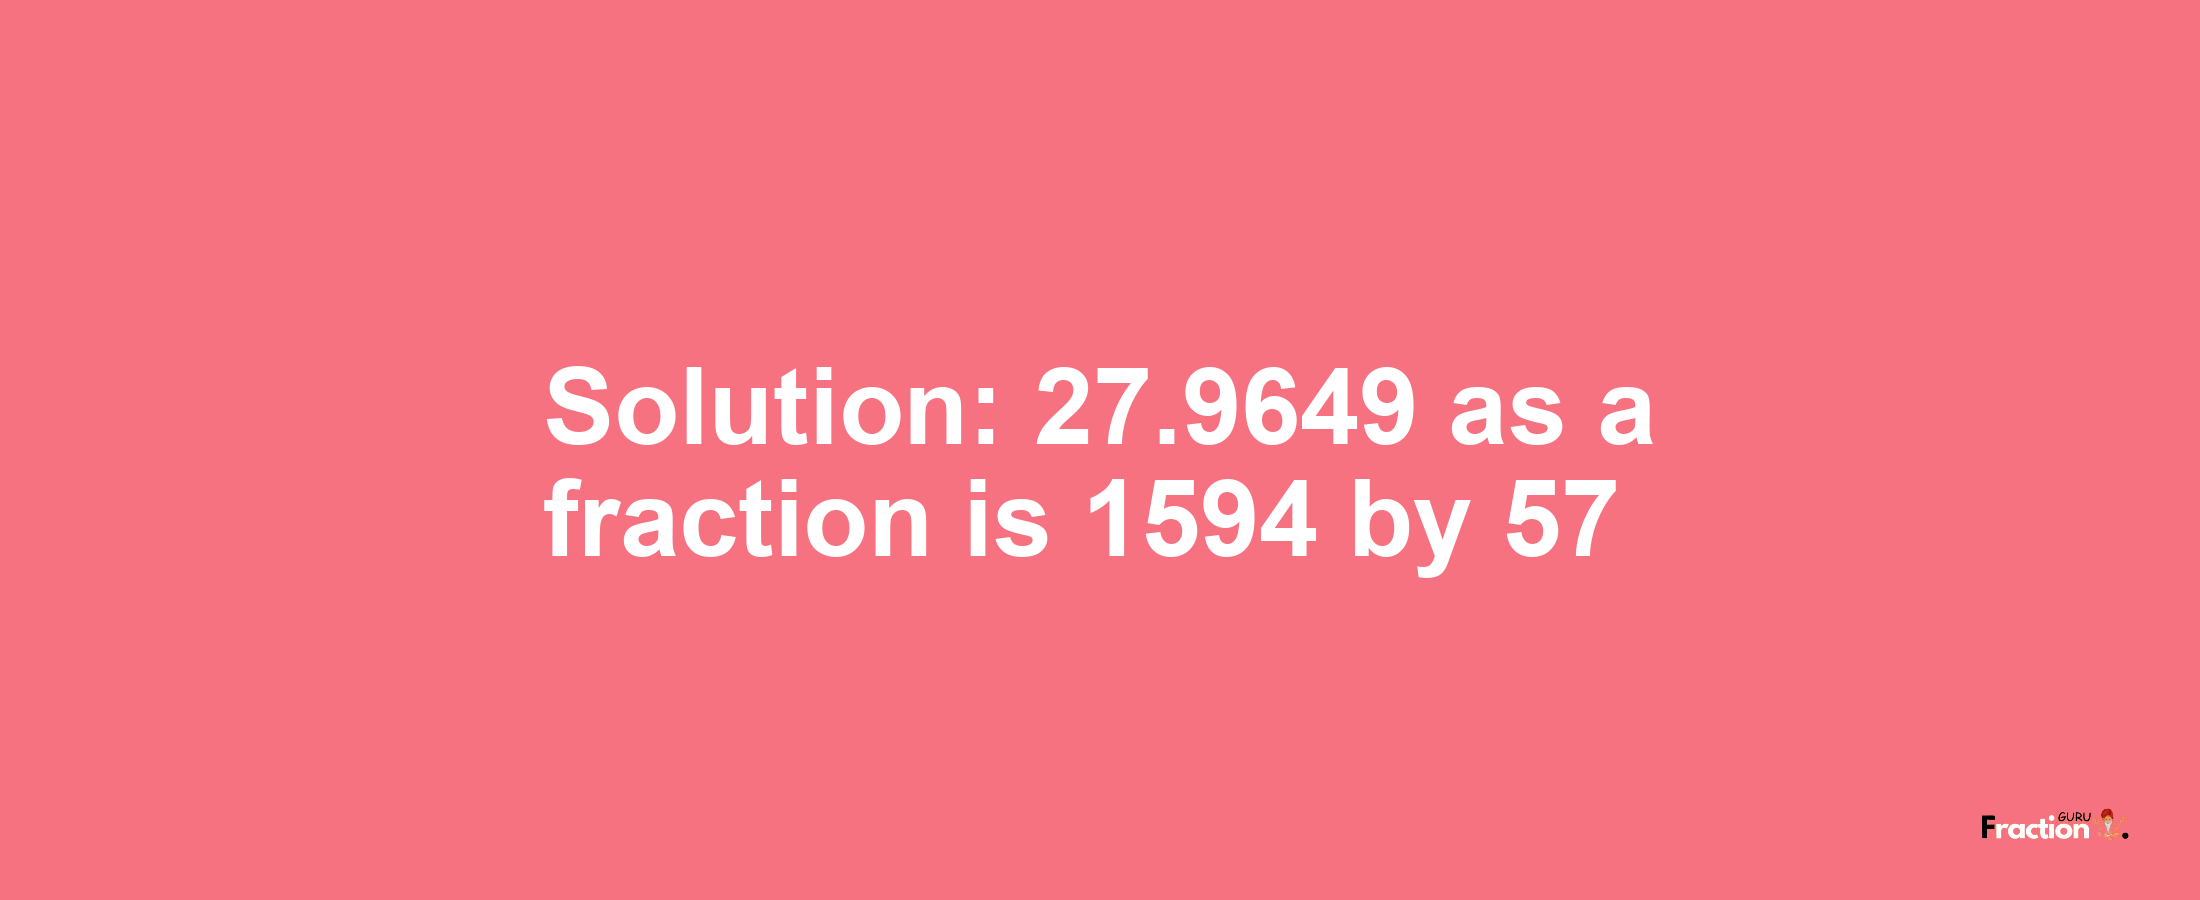 Solution:27.9649 as a fraction is 1594/57